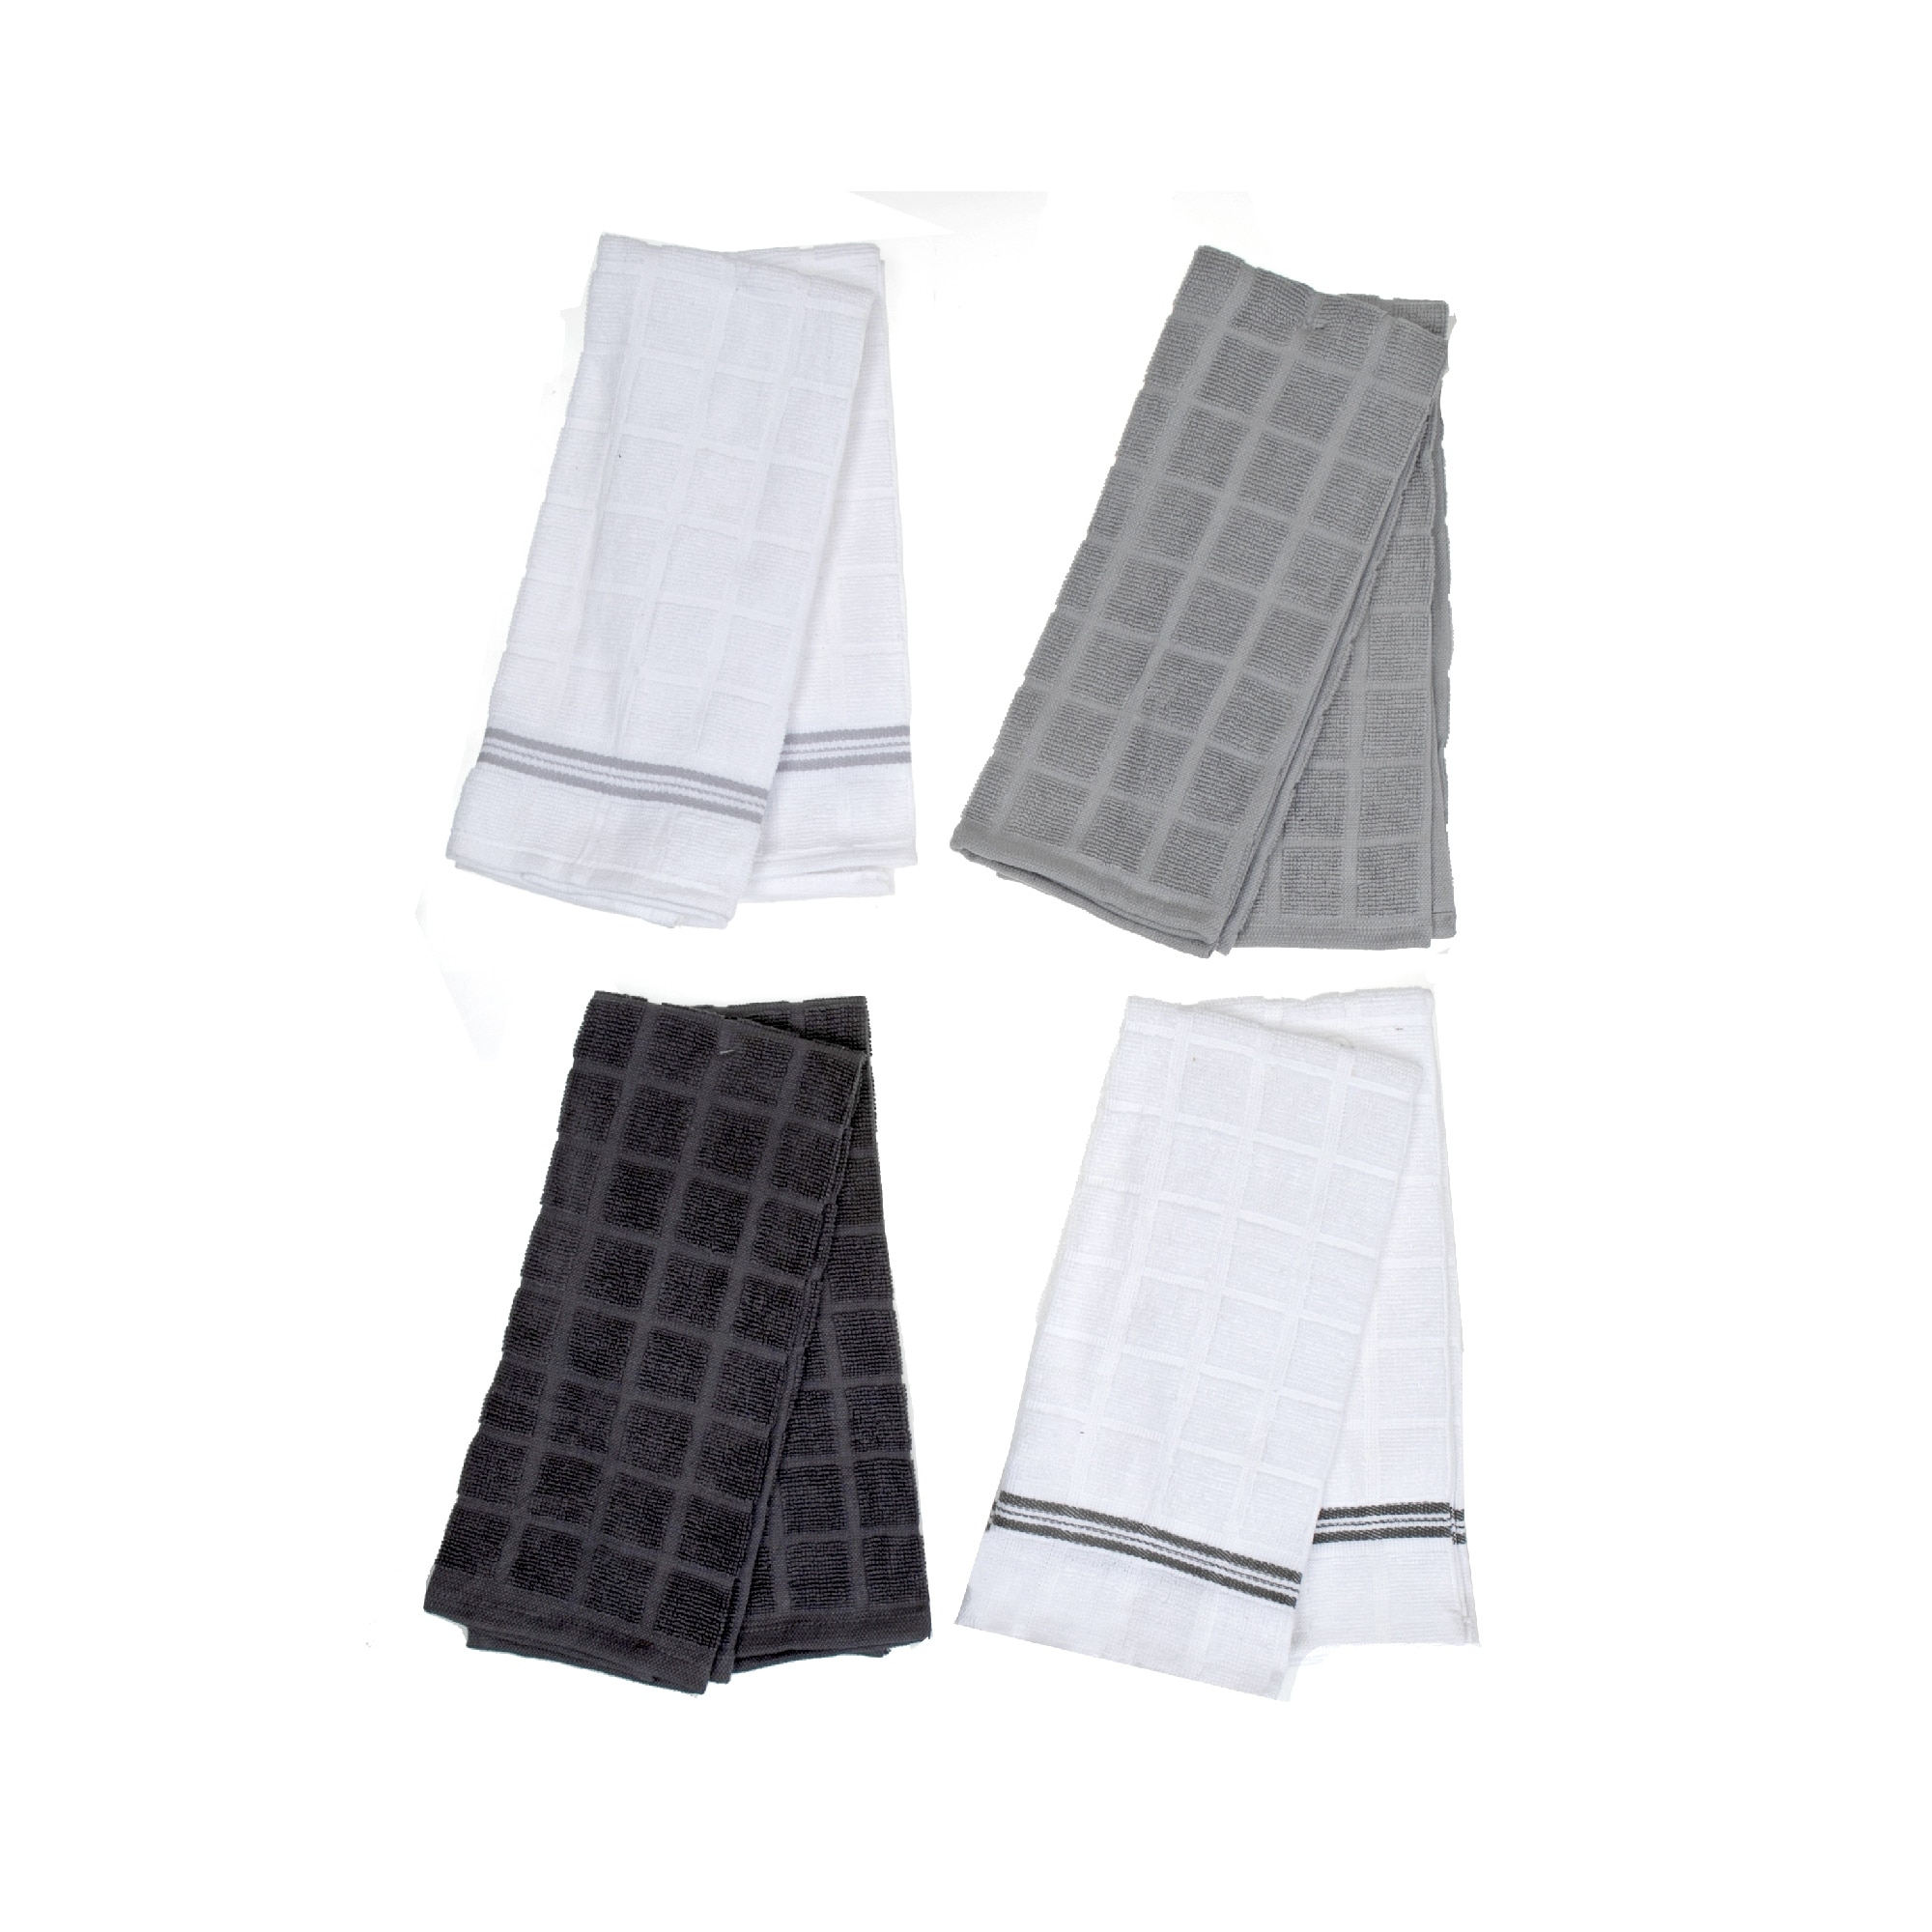 https://ak1.ostkcdn.com/images/products/is/images/direct/fc933492c4a46a57e100c05f7aa4a42815ddff09/2Pk-Checkered-Terry-Kitchen-Towels-%28Asstd%29.jpg